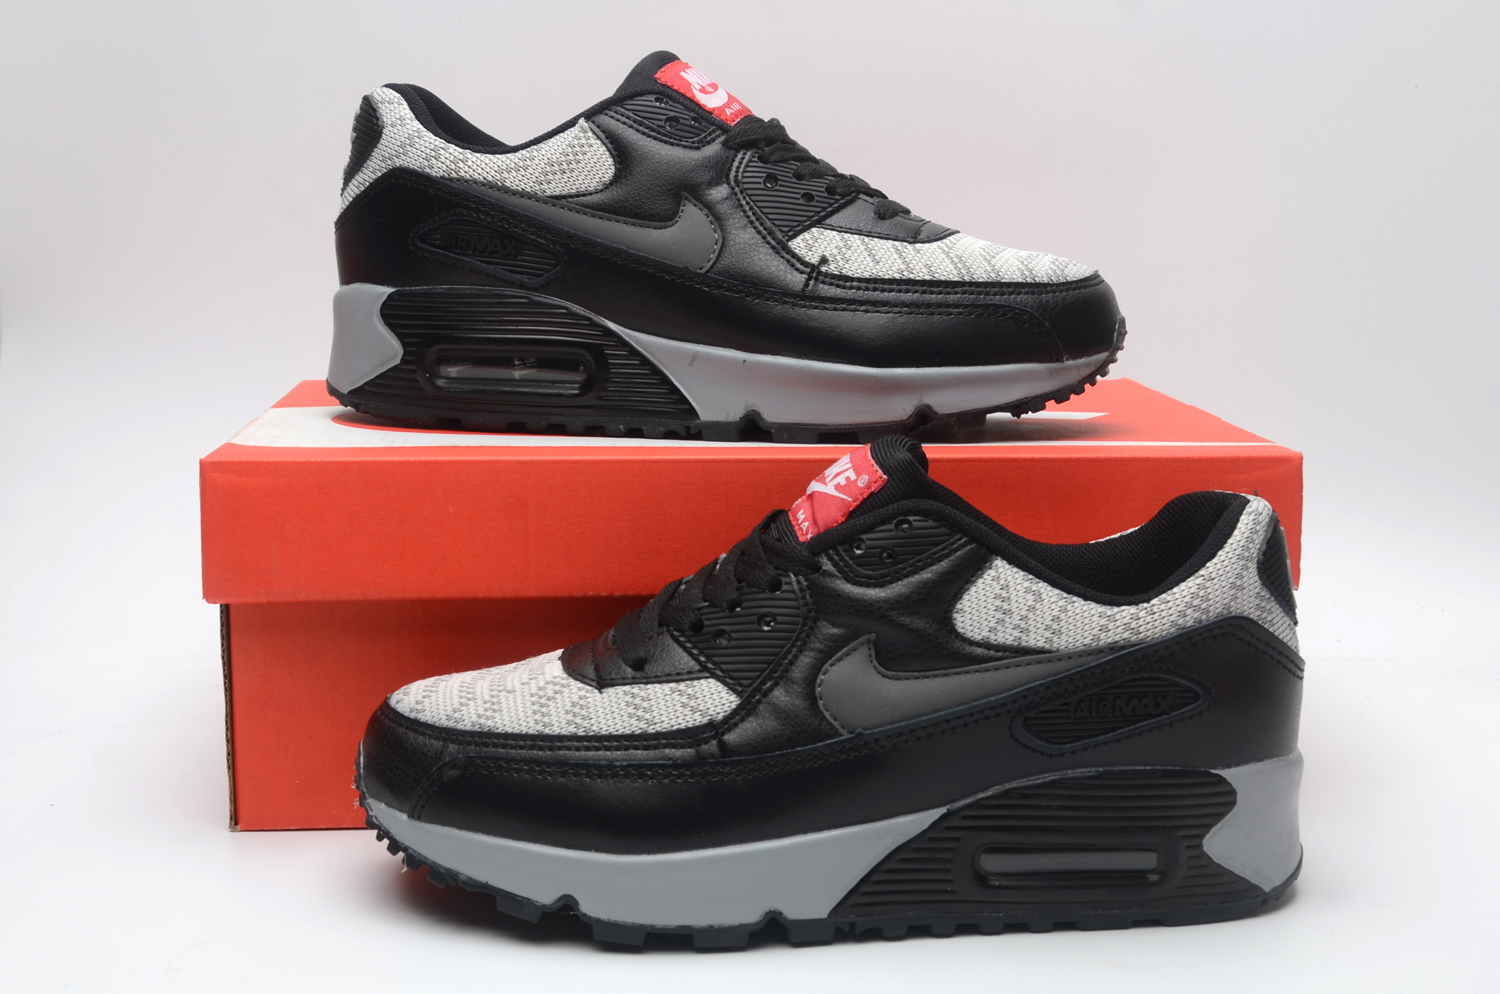 Women's Running weapon Air Max 90 Shoes 036